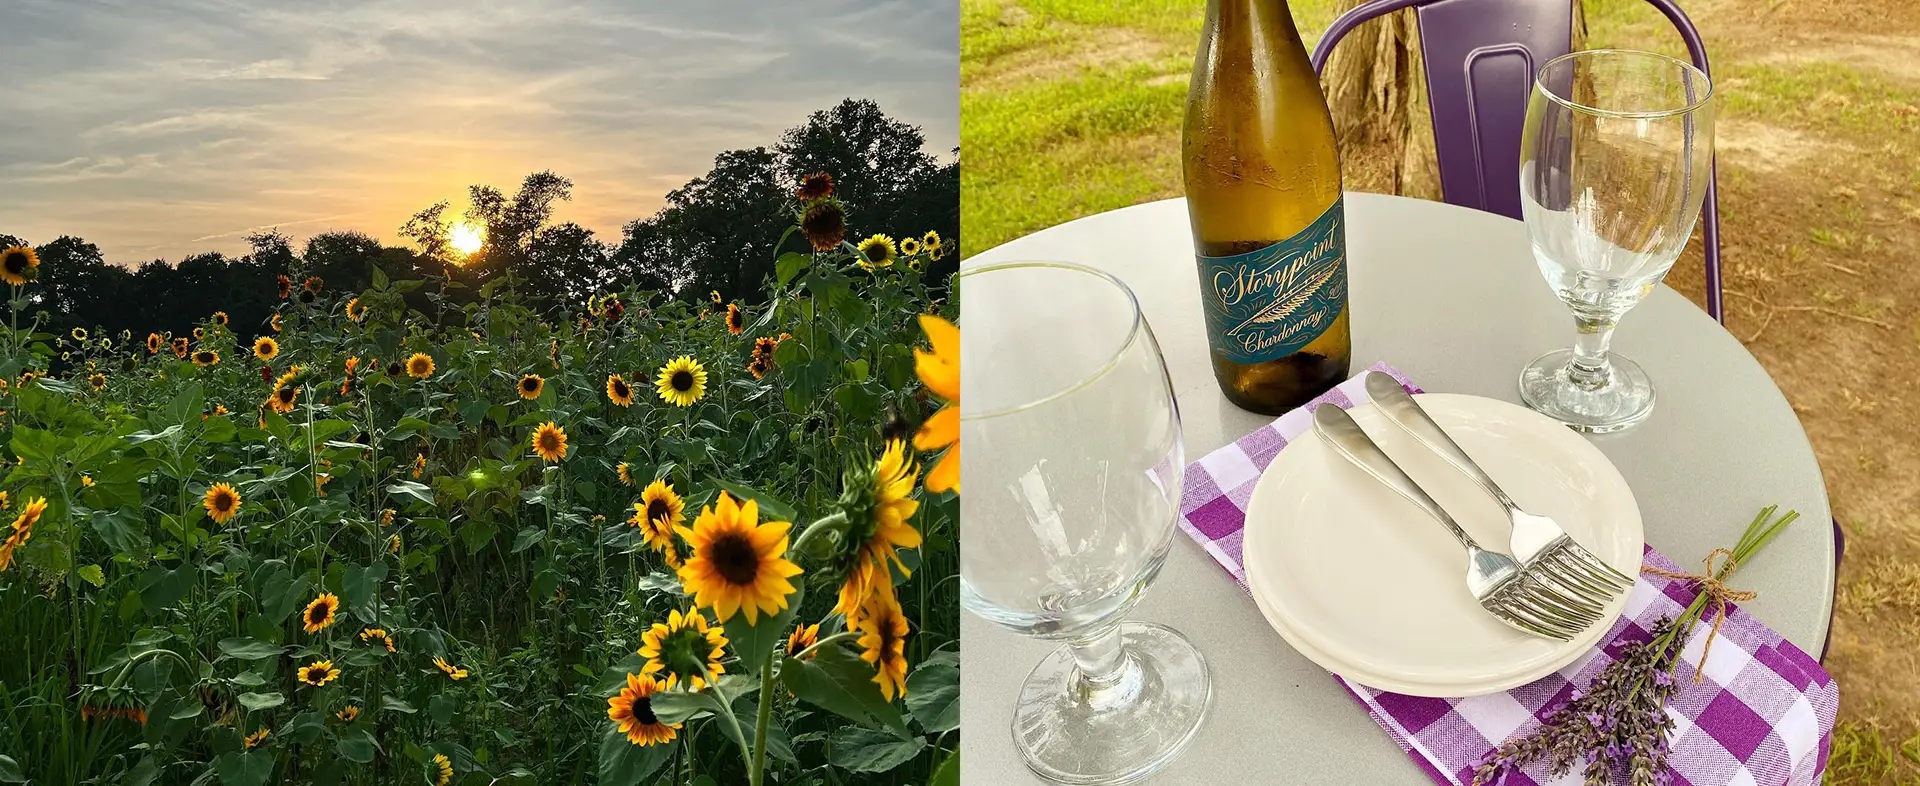 Sunflower field and wine on a table